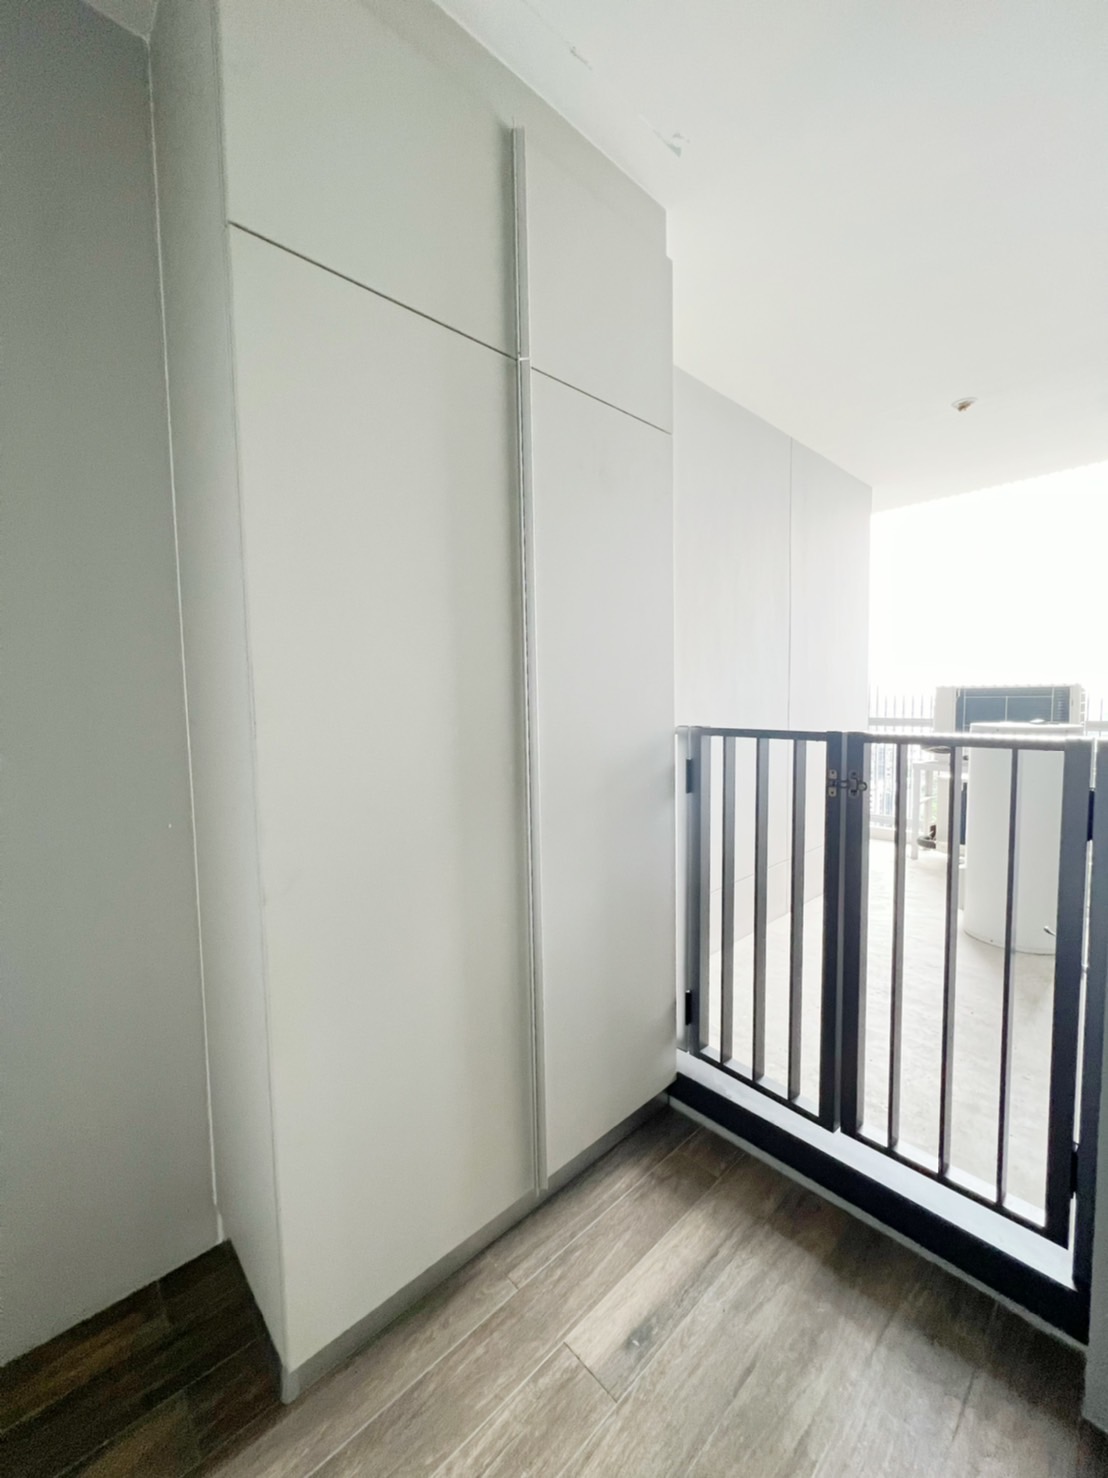 Kraam Sukhumvit 26| BTS Phrom Phong |The best price ,Quiet and private,View city | #HL